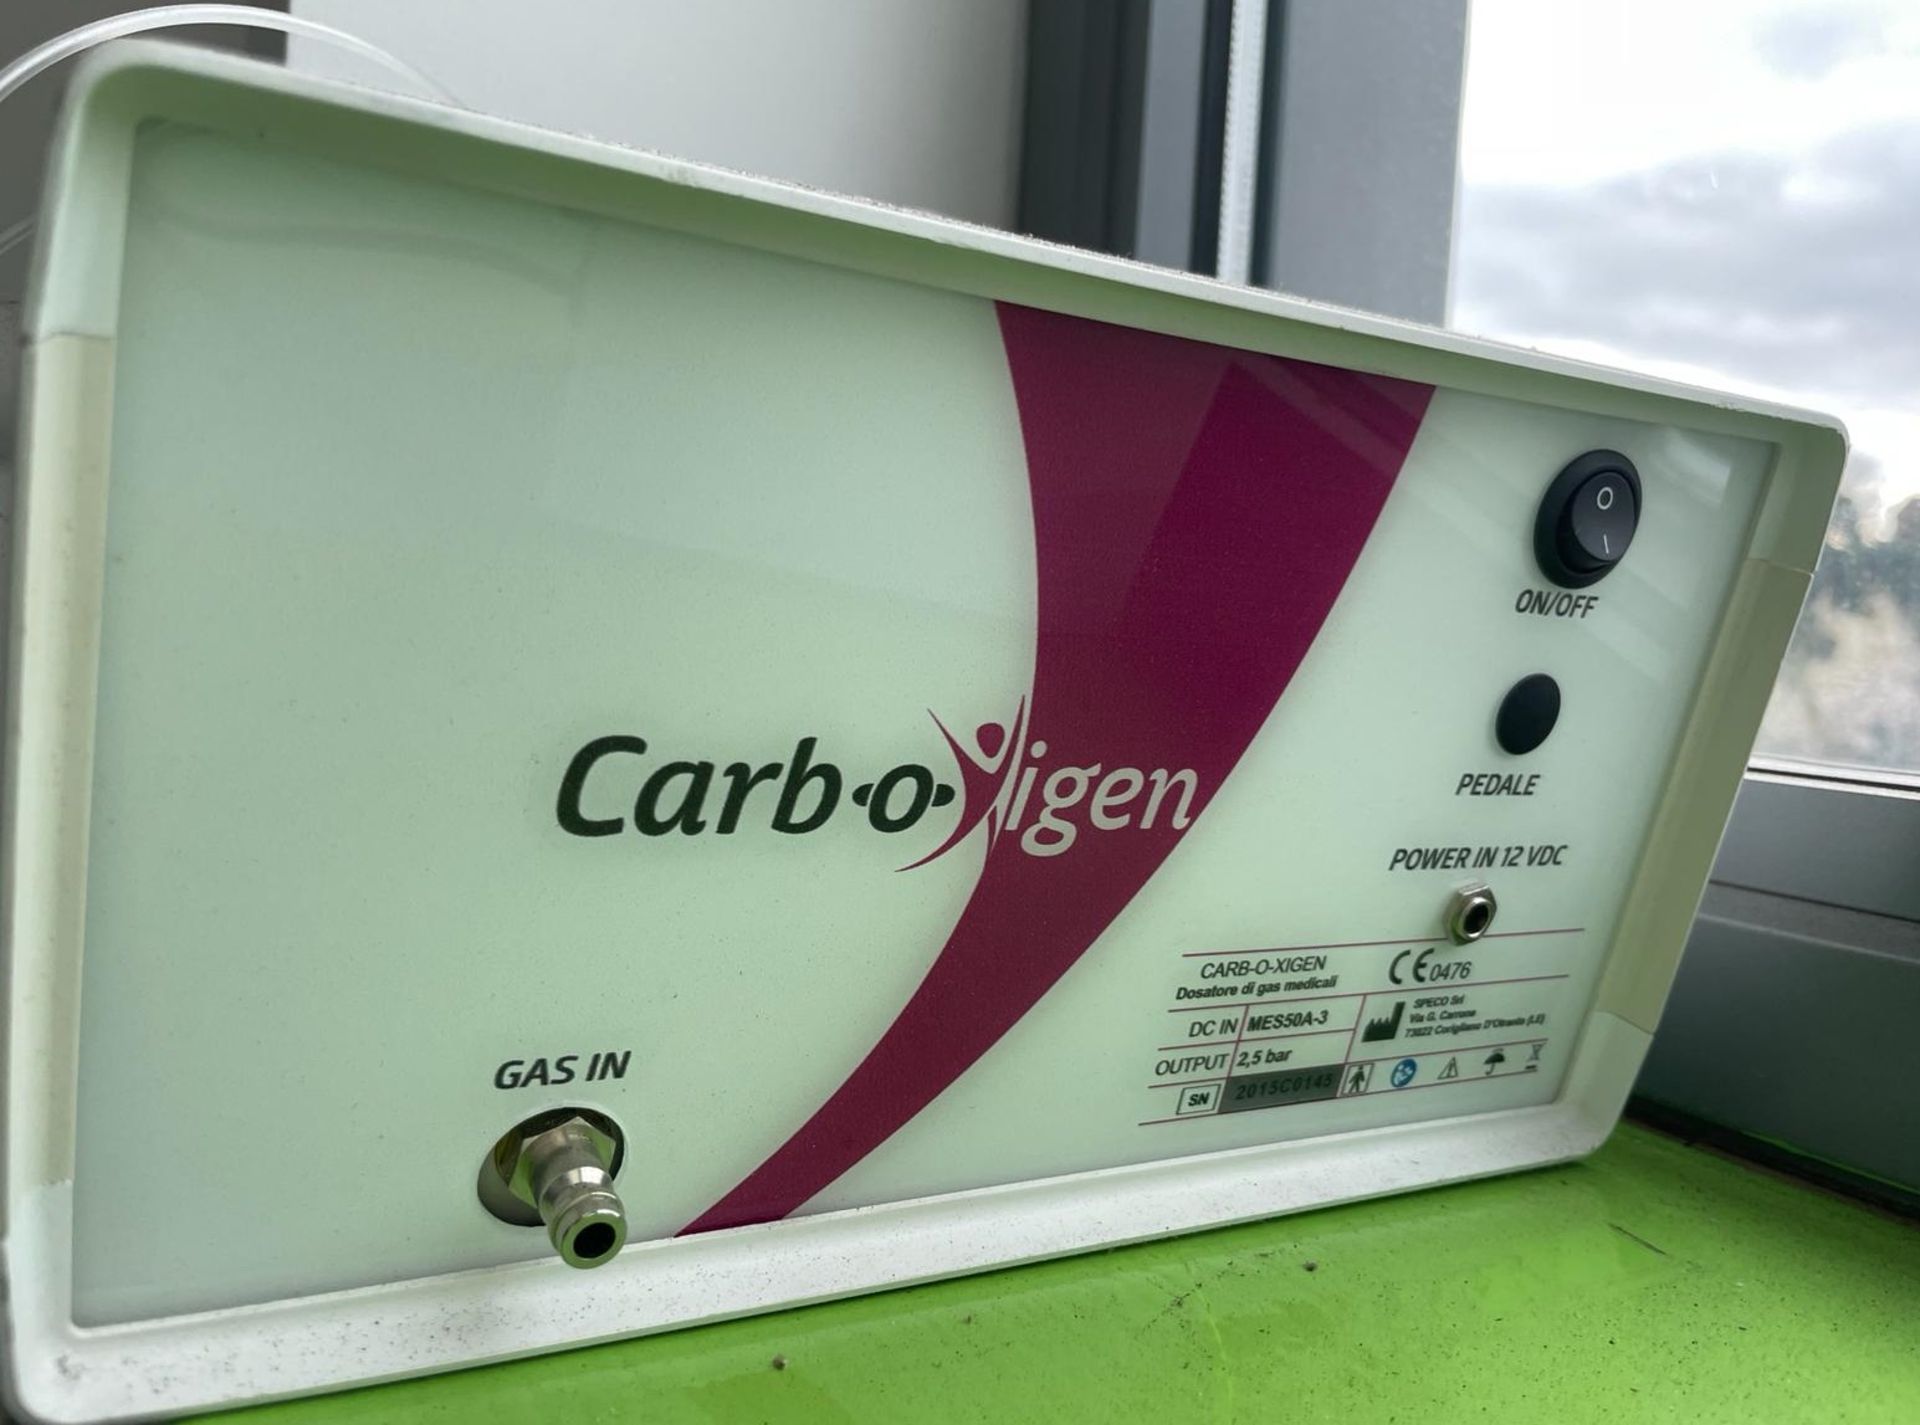 1 x Carb-O-Xygen Table Carboxytherapy Medical Gas Dispenser - For The Sterile and Personalized - Image 5 of 6